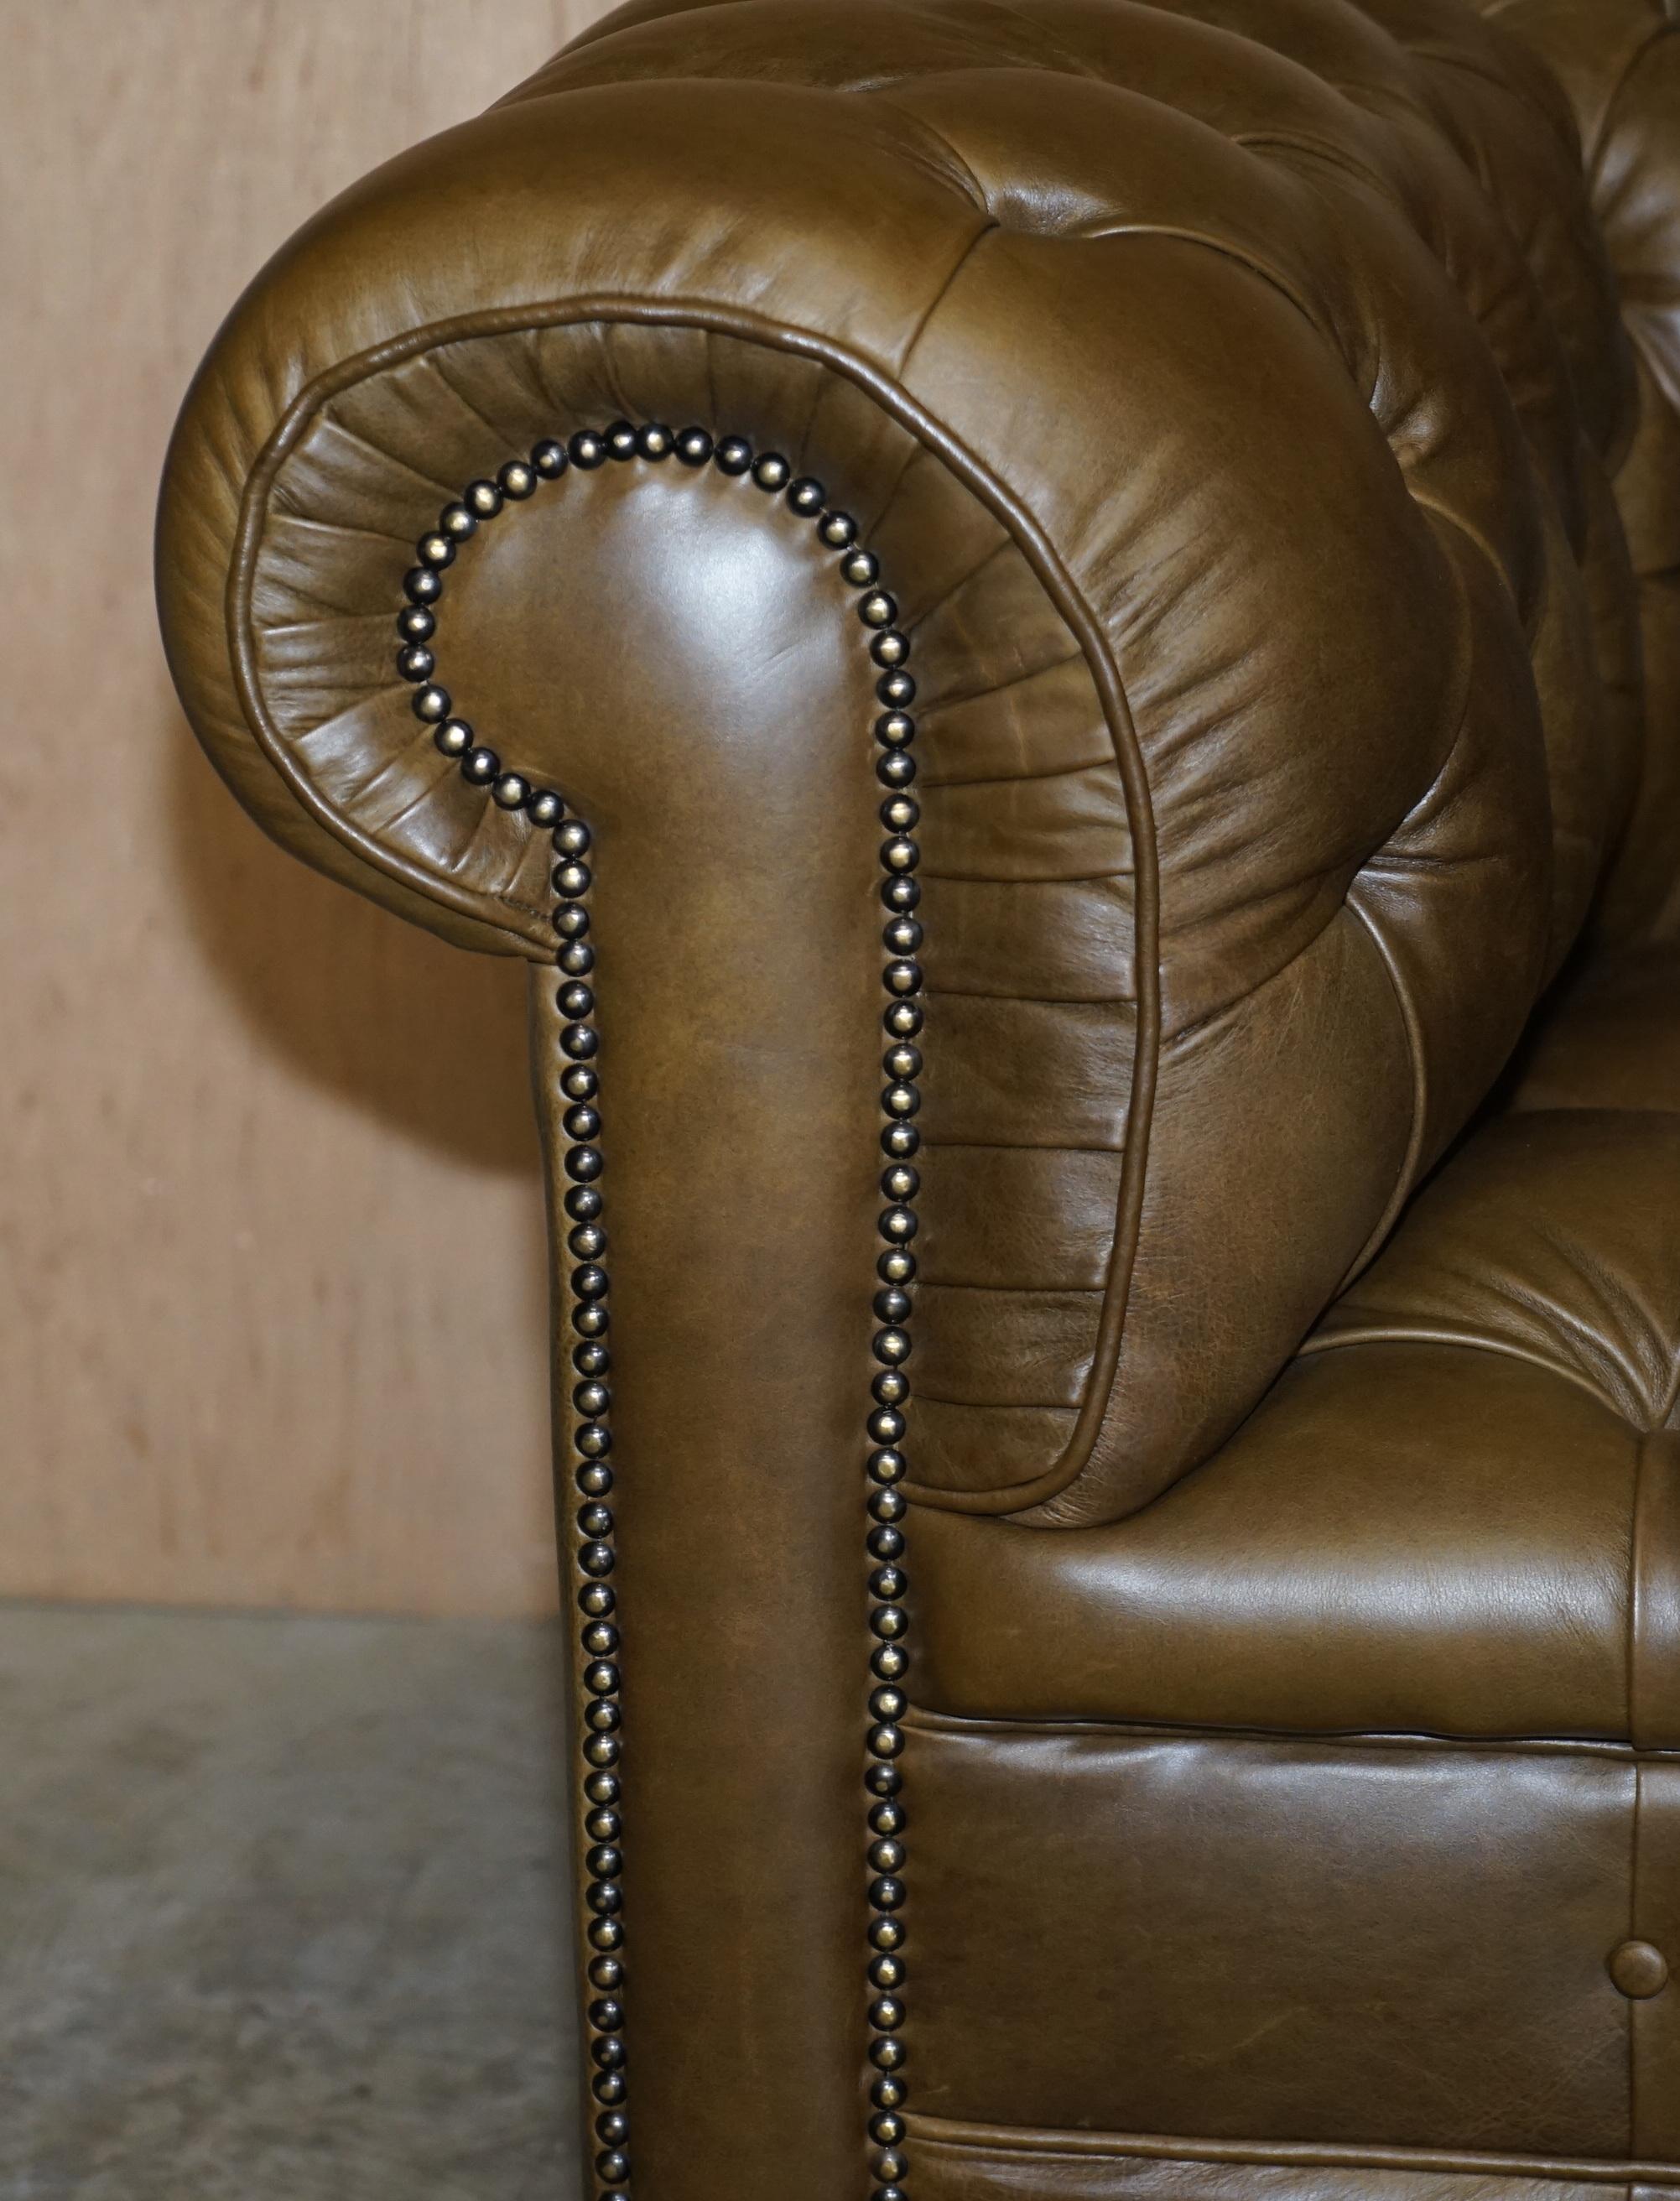 olive green leather couch